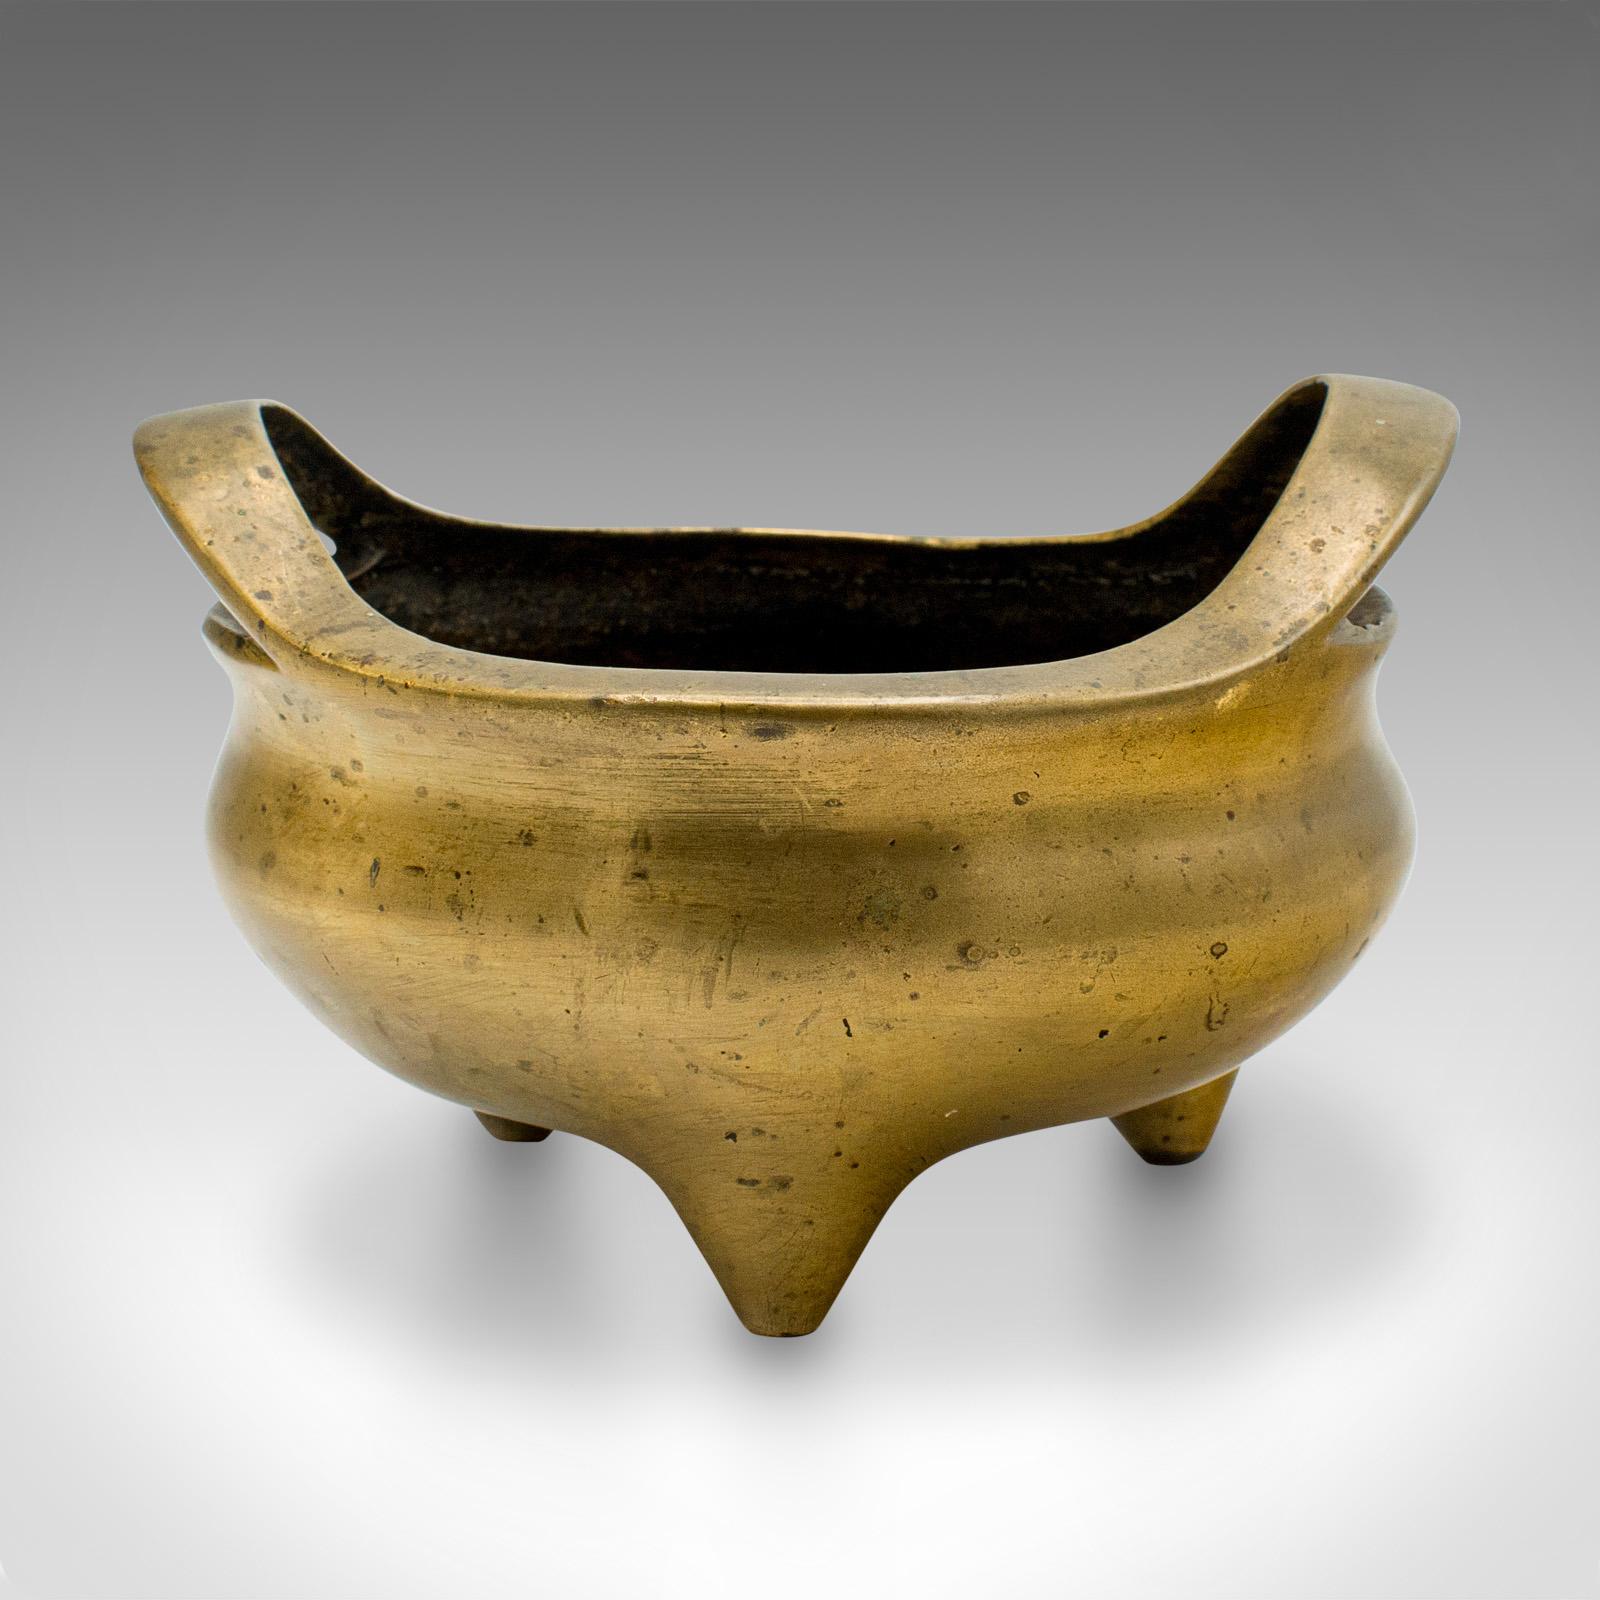 19th Century Antique Censer, Chinese, Bronze, Incense Burner, Libation Cup, Victorian, C.1850 For Sale